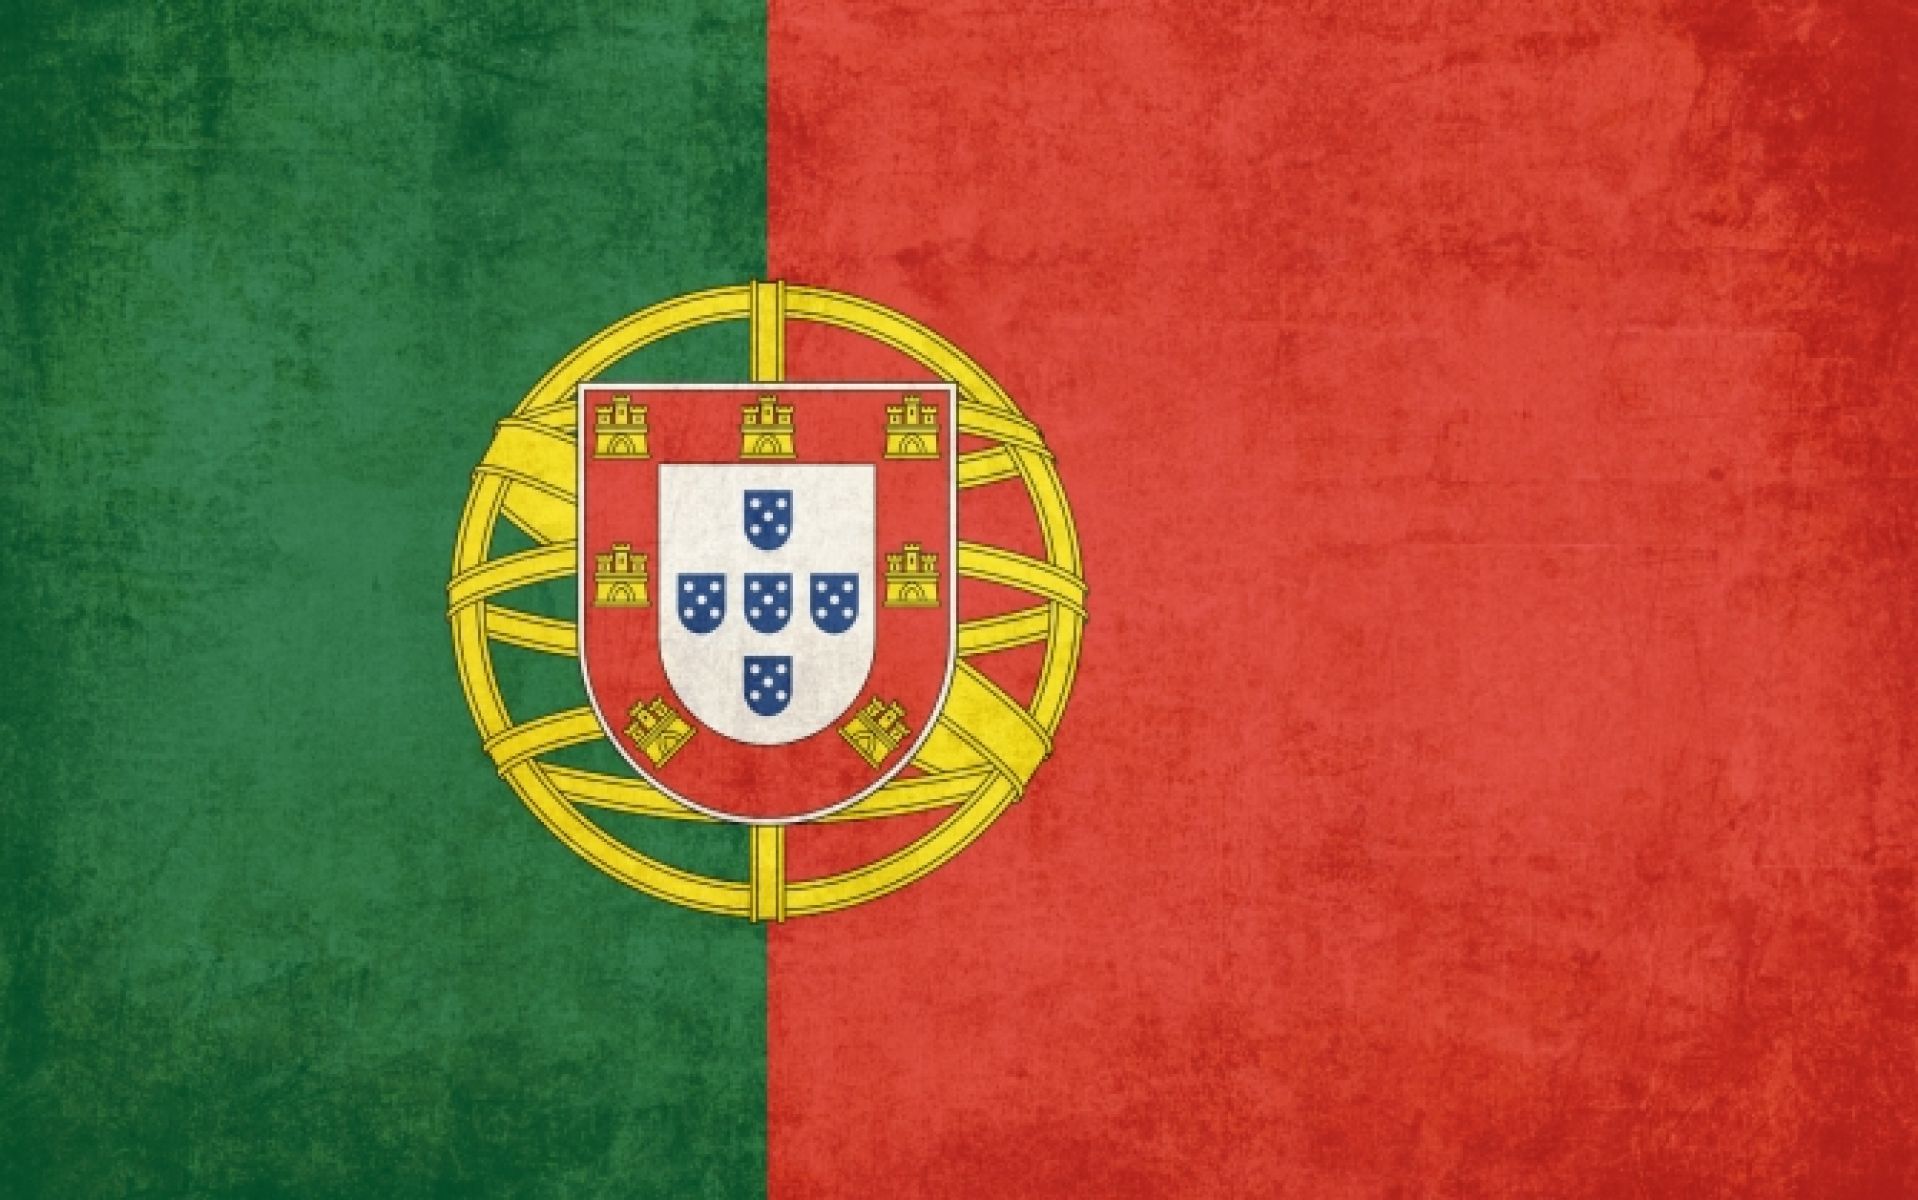 My Country PORTUGAL: Hand-Painted Band for Apple Watch Inspired by NATIONAL FLAG of Portugal